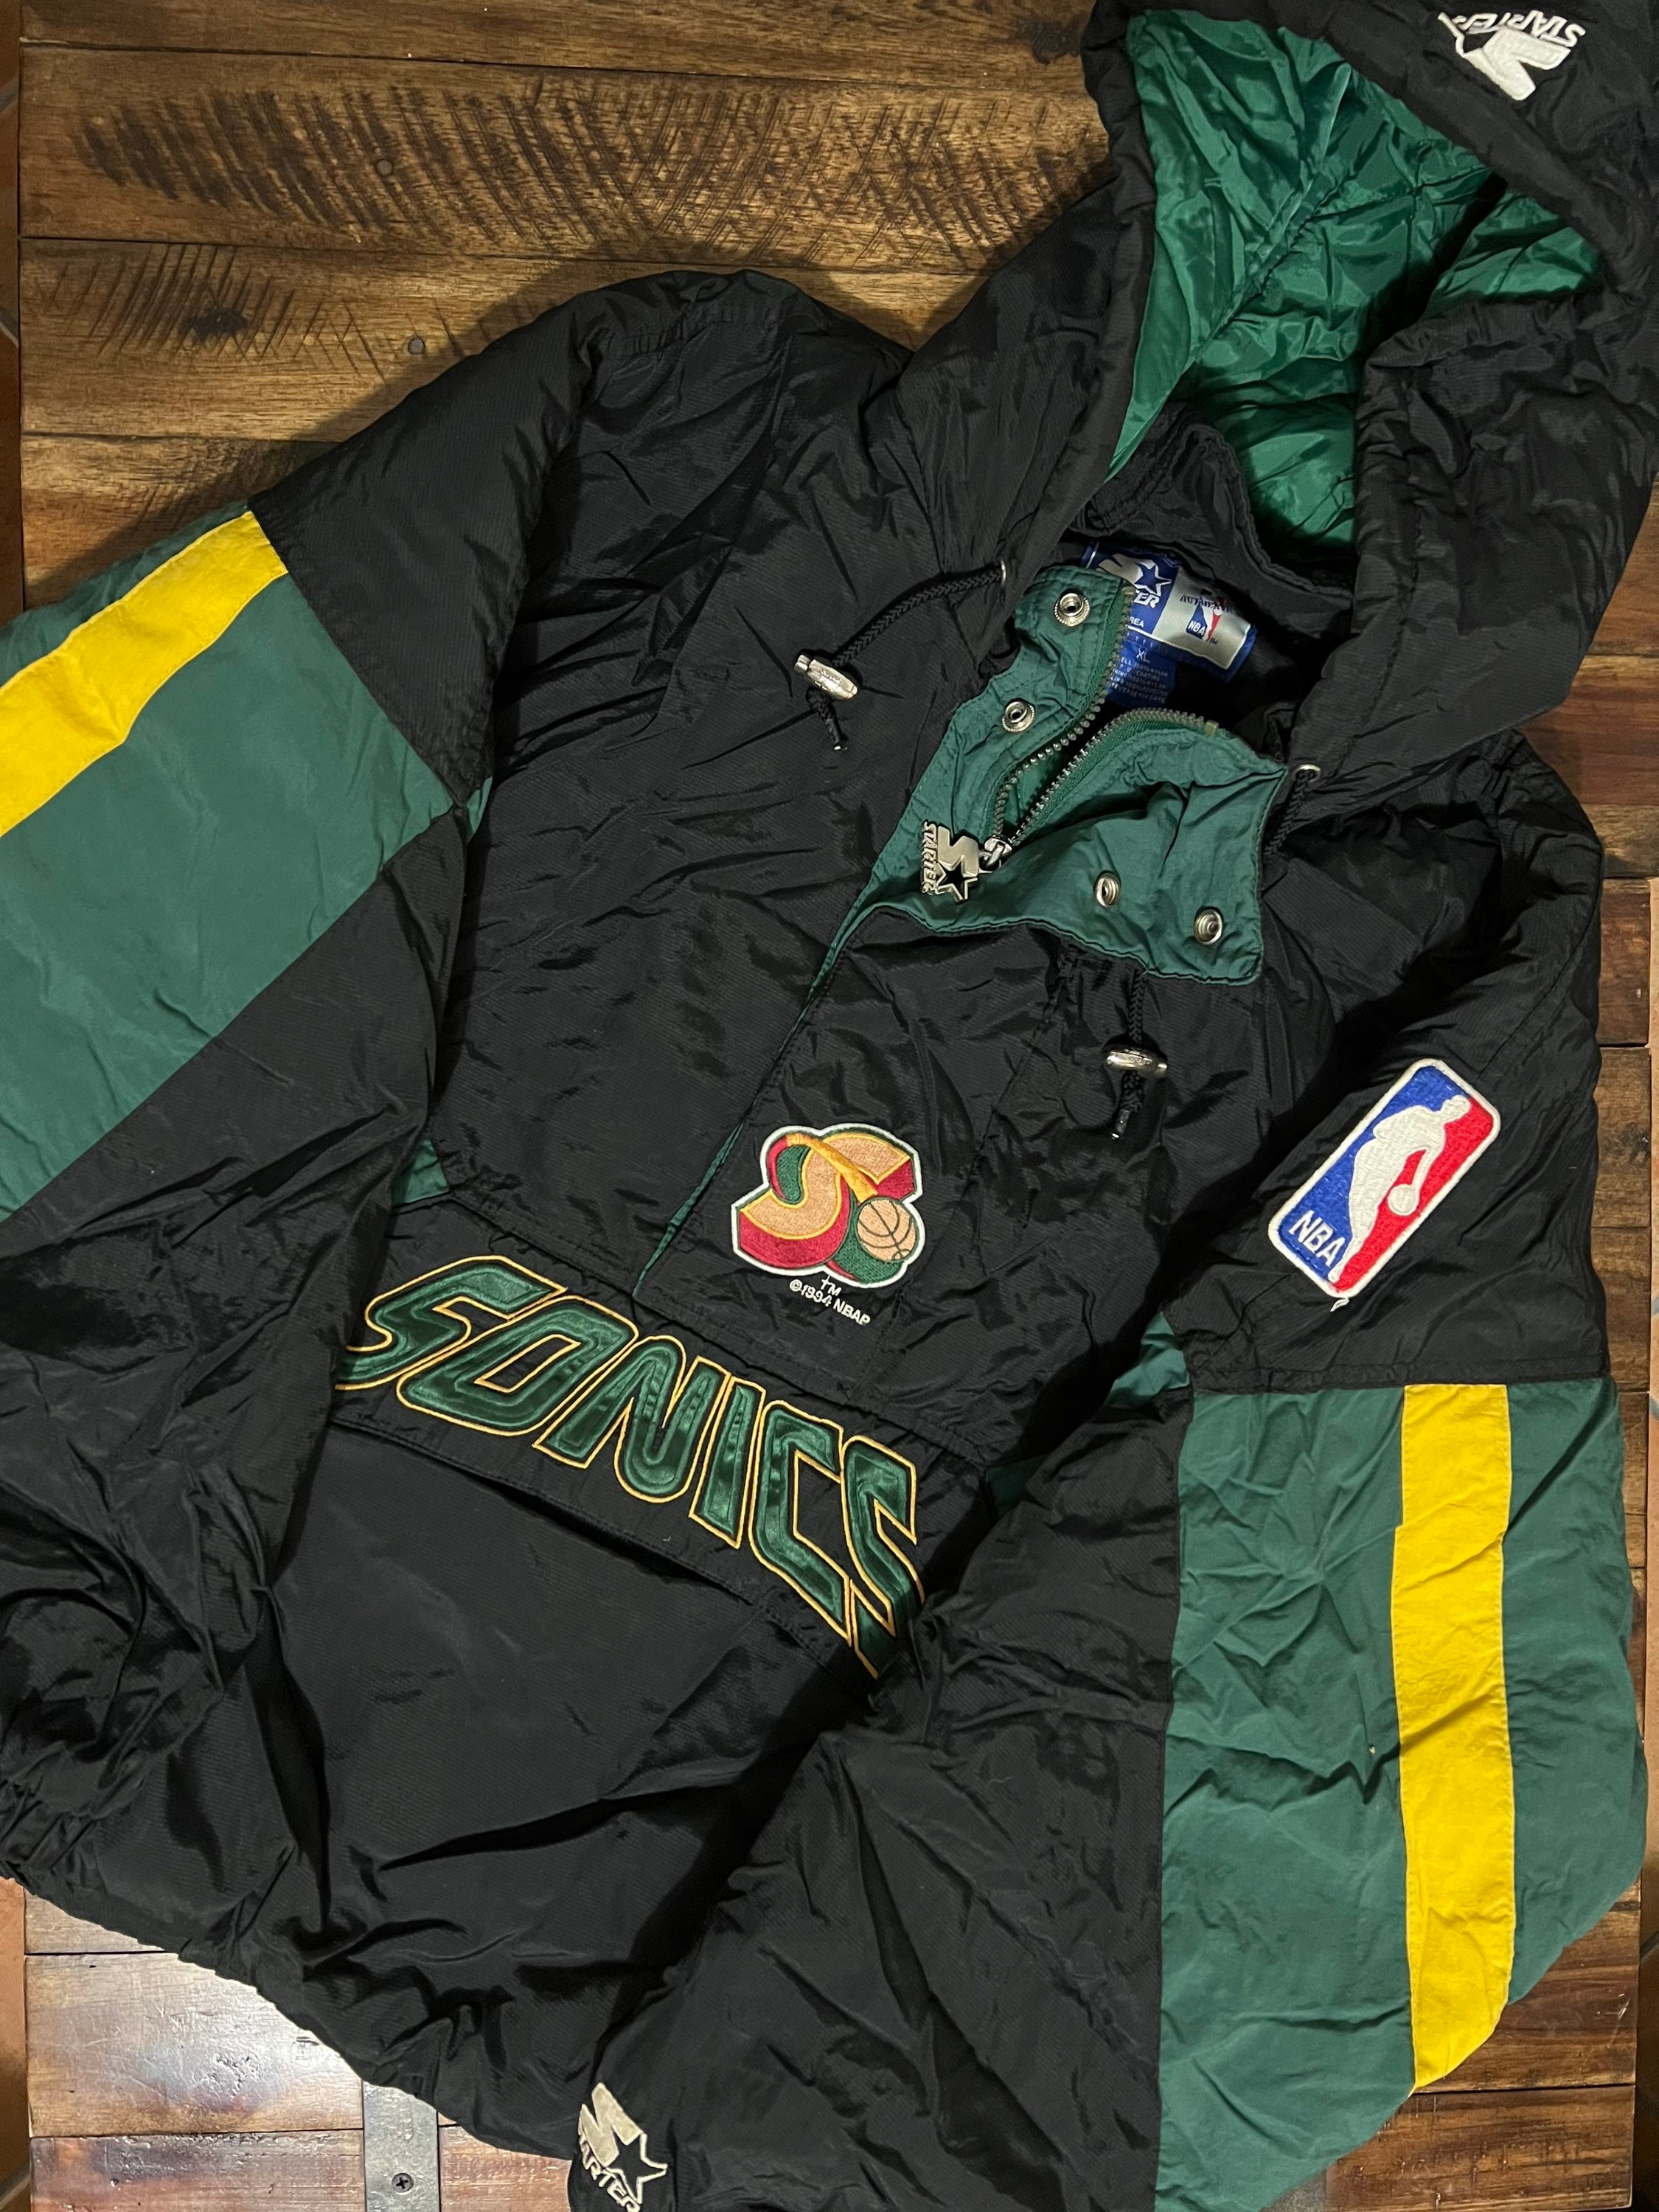 Seattle Supersonics Jersey Free Shipping - The Vintage Twin